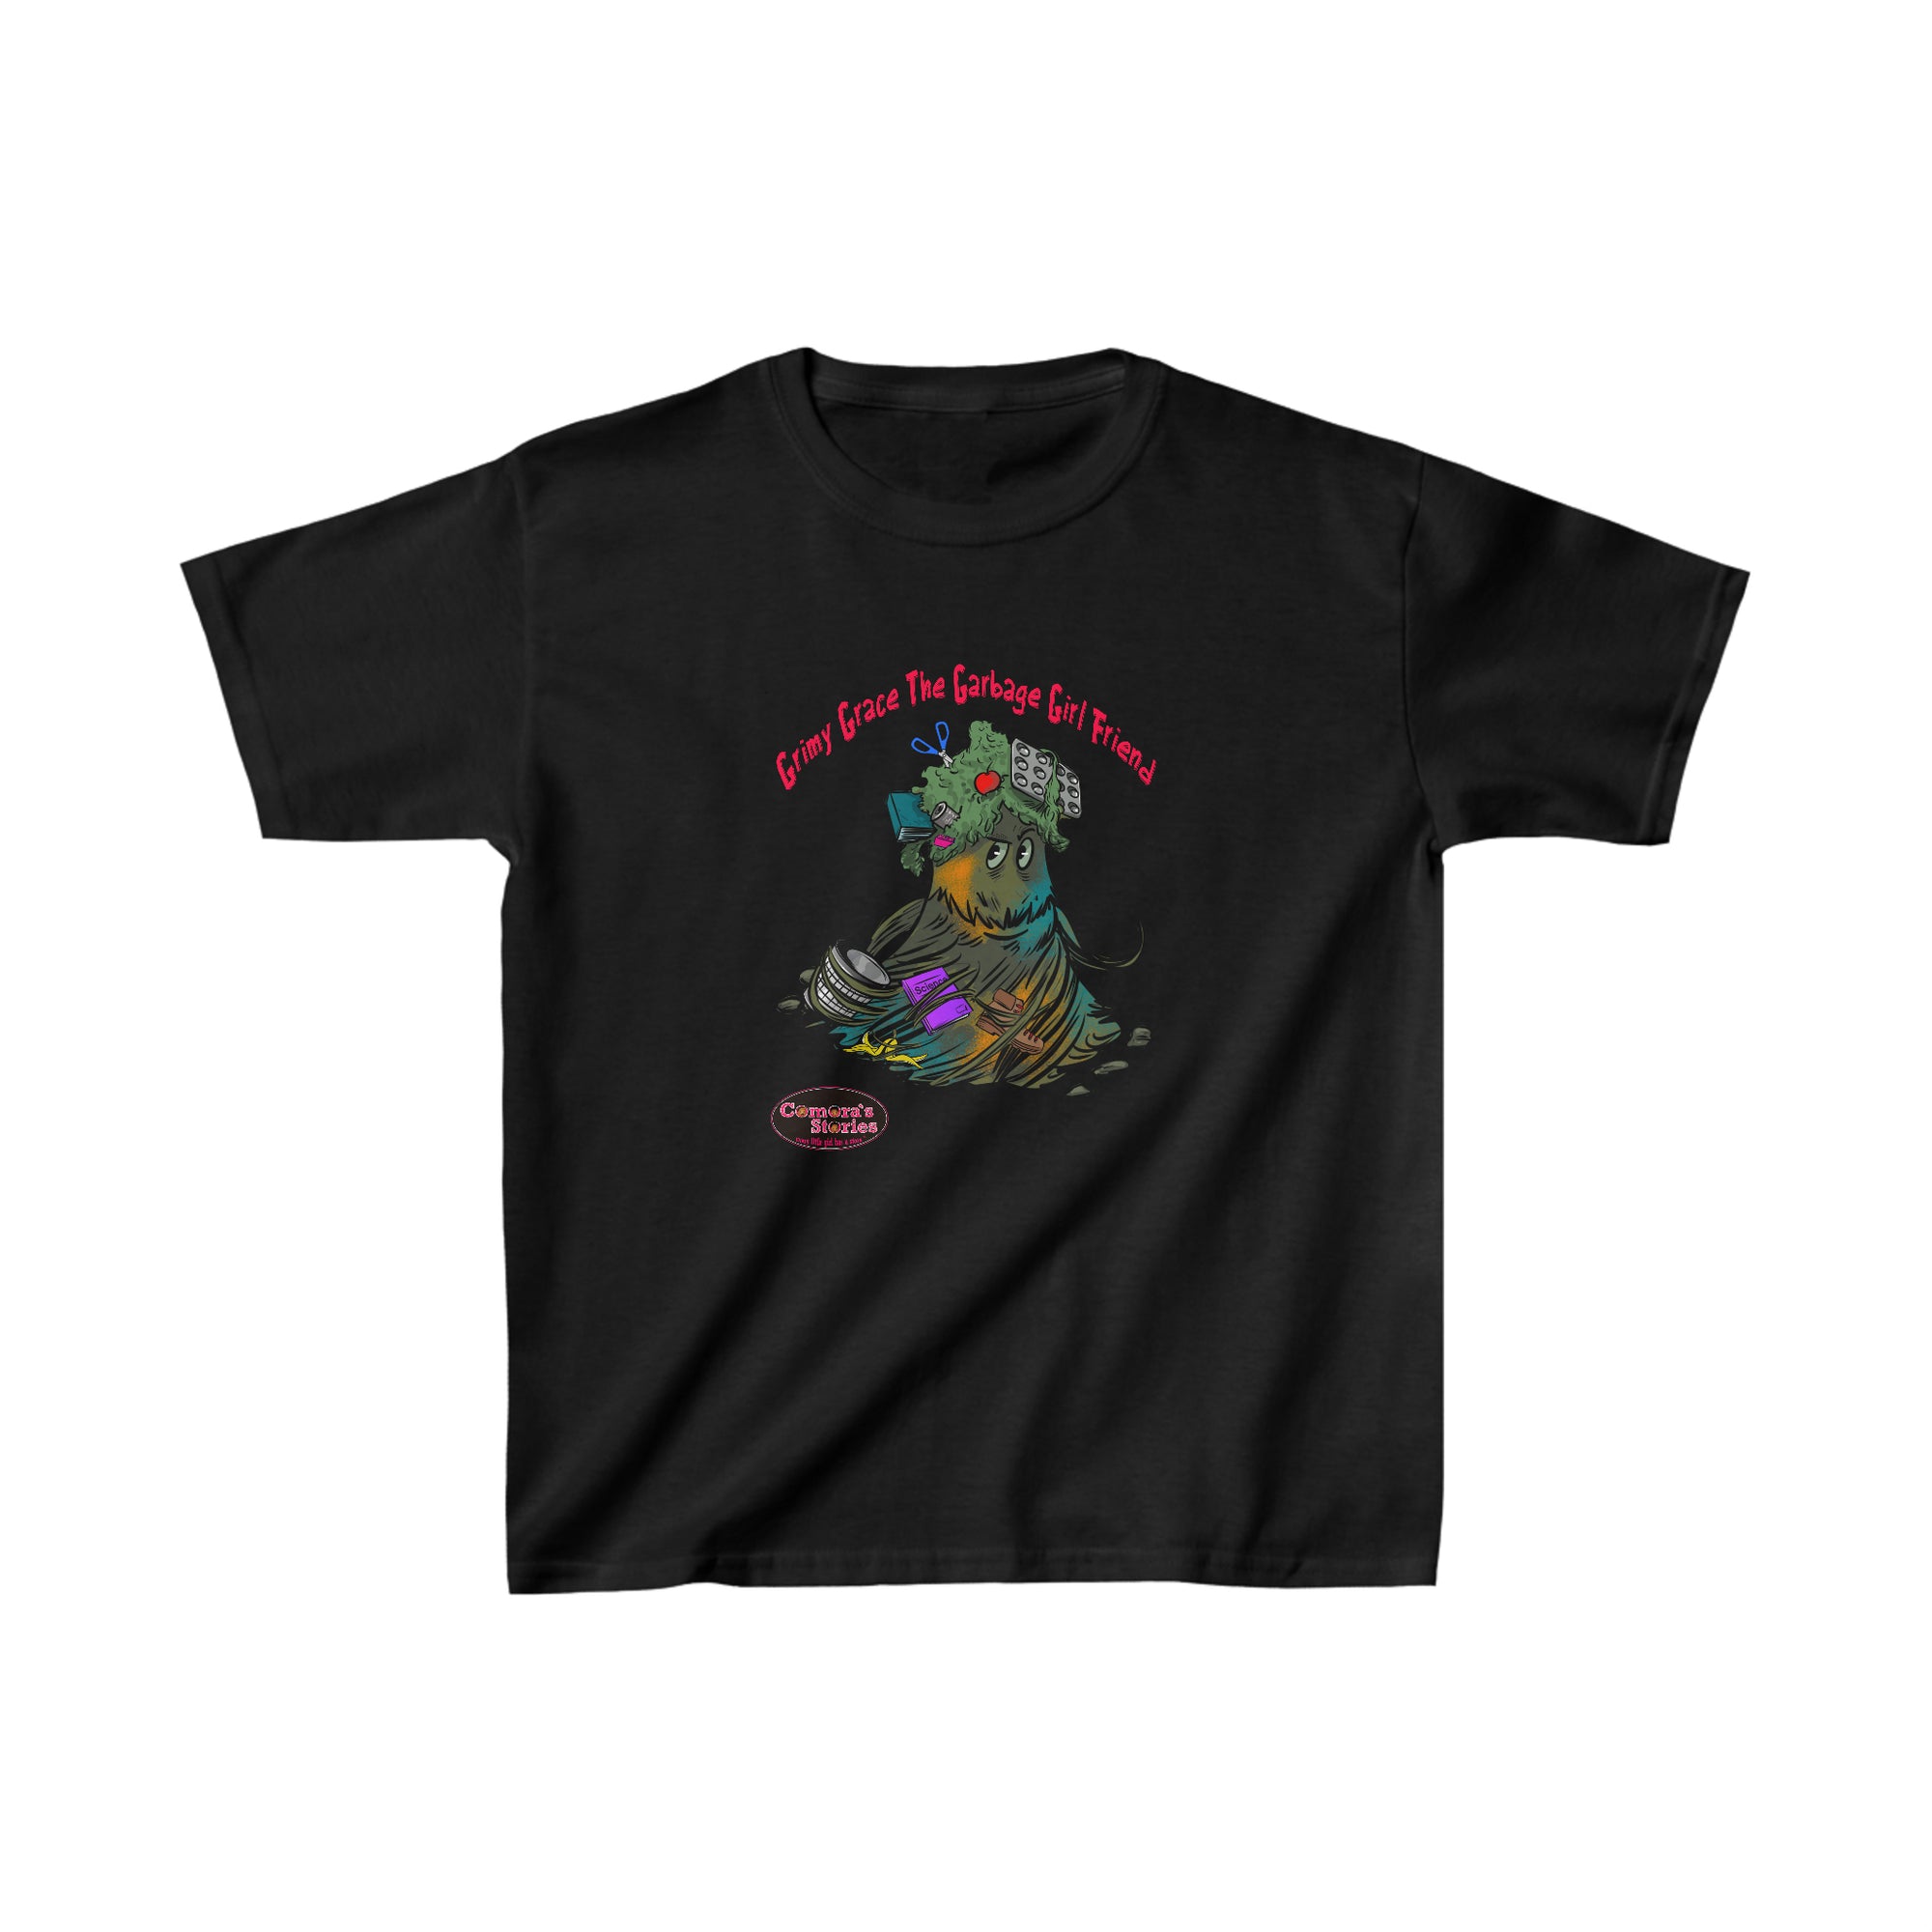 Grimy Grace the Garbage Girl Friend Tee Shirt